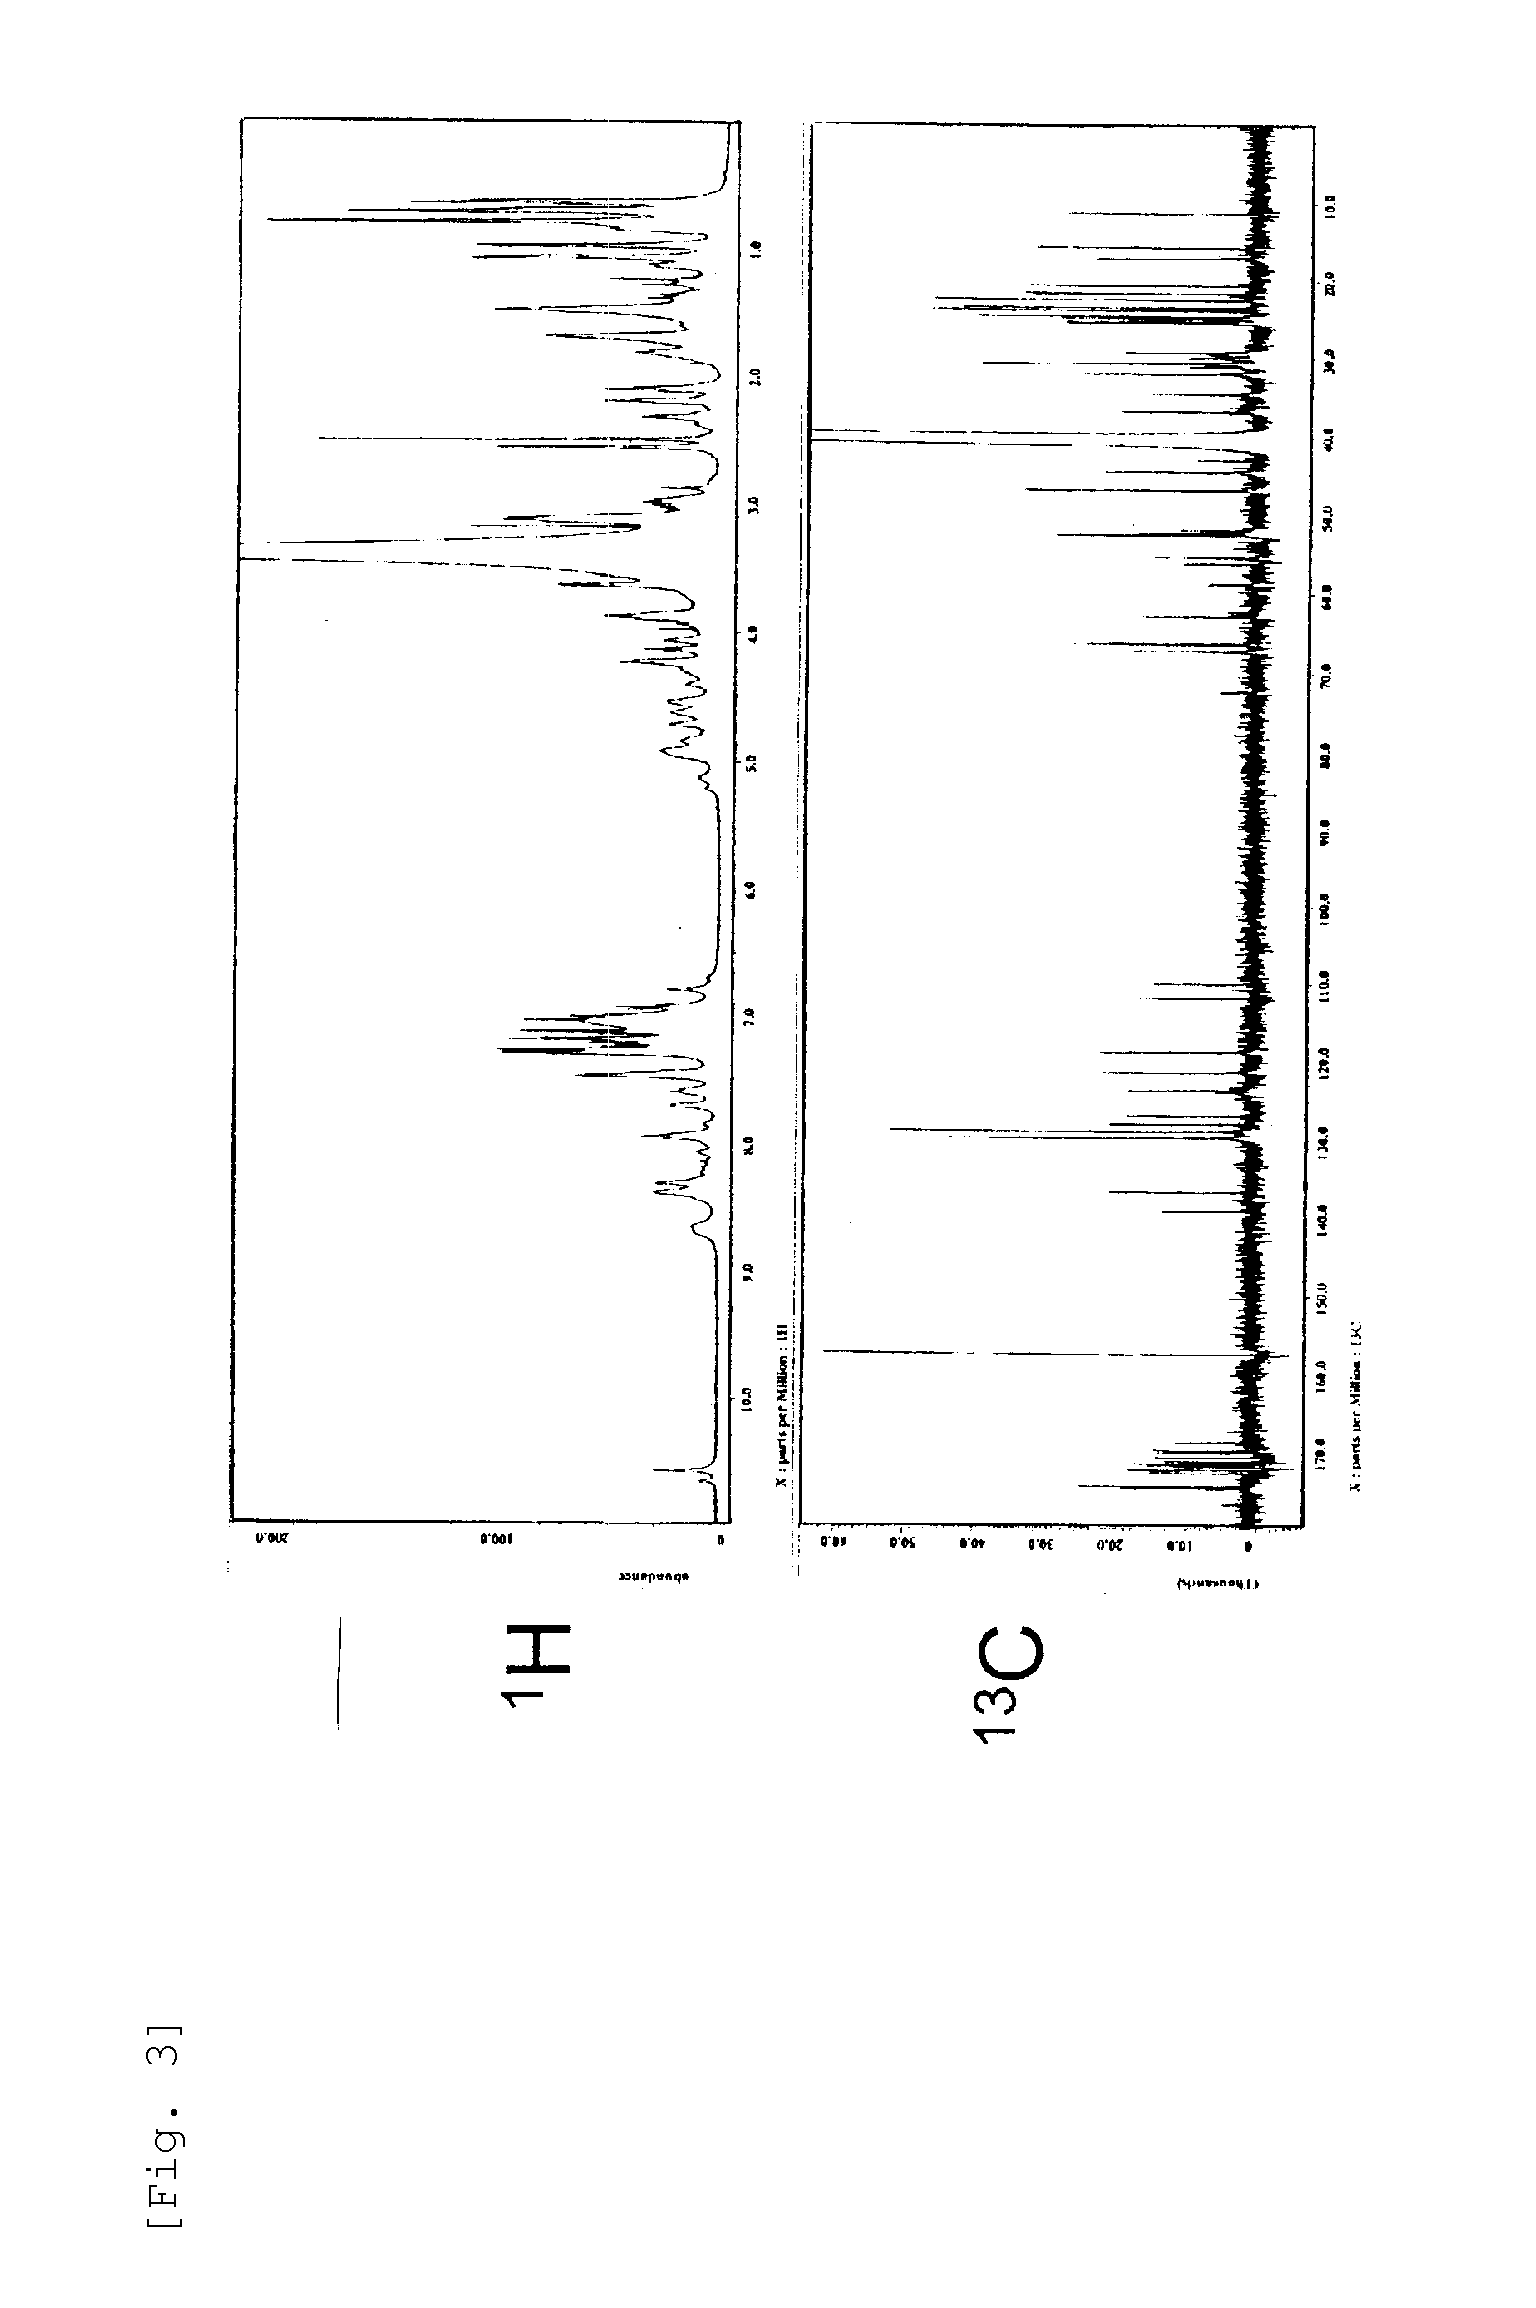 Novel cyclic peptide compound, method for producing same, Anti-infective agent, antibiotic-containing fraction, antibiotic, method for producing antibiotic, antibiotic-producing microorganism, and antibiotic produced by same